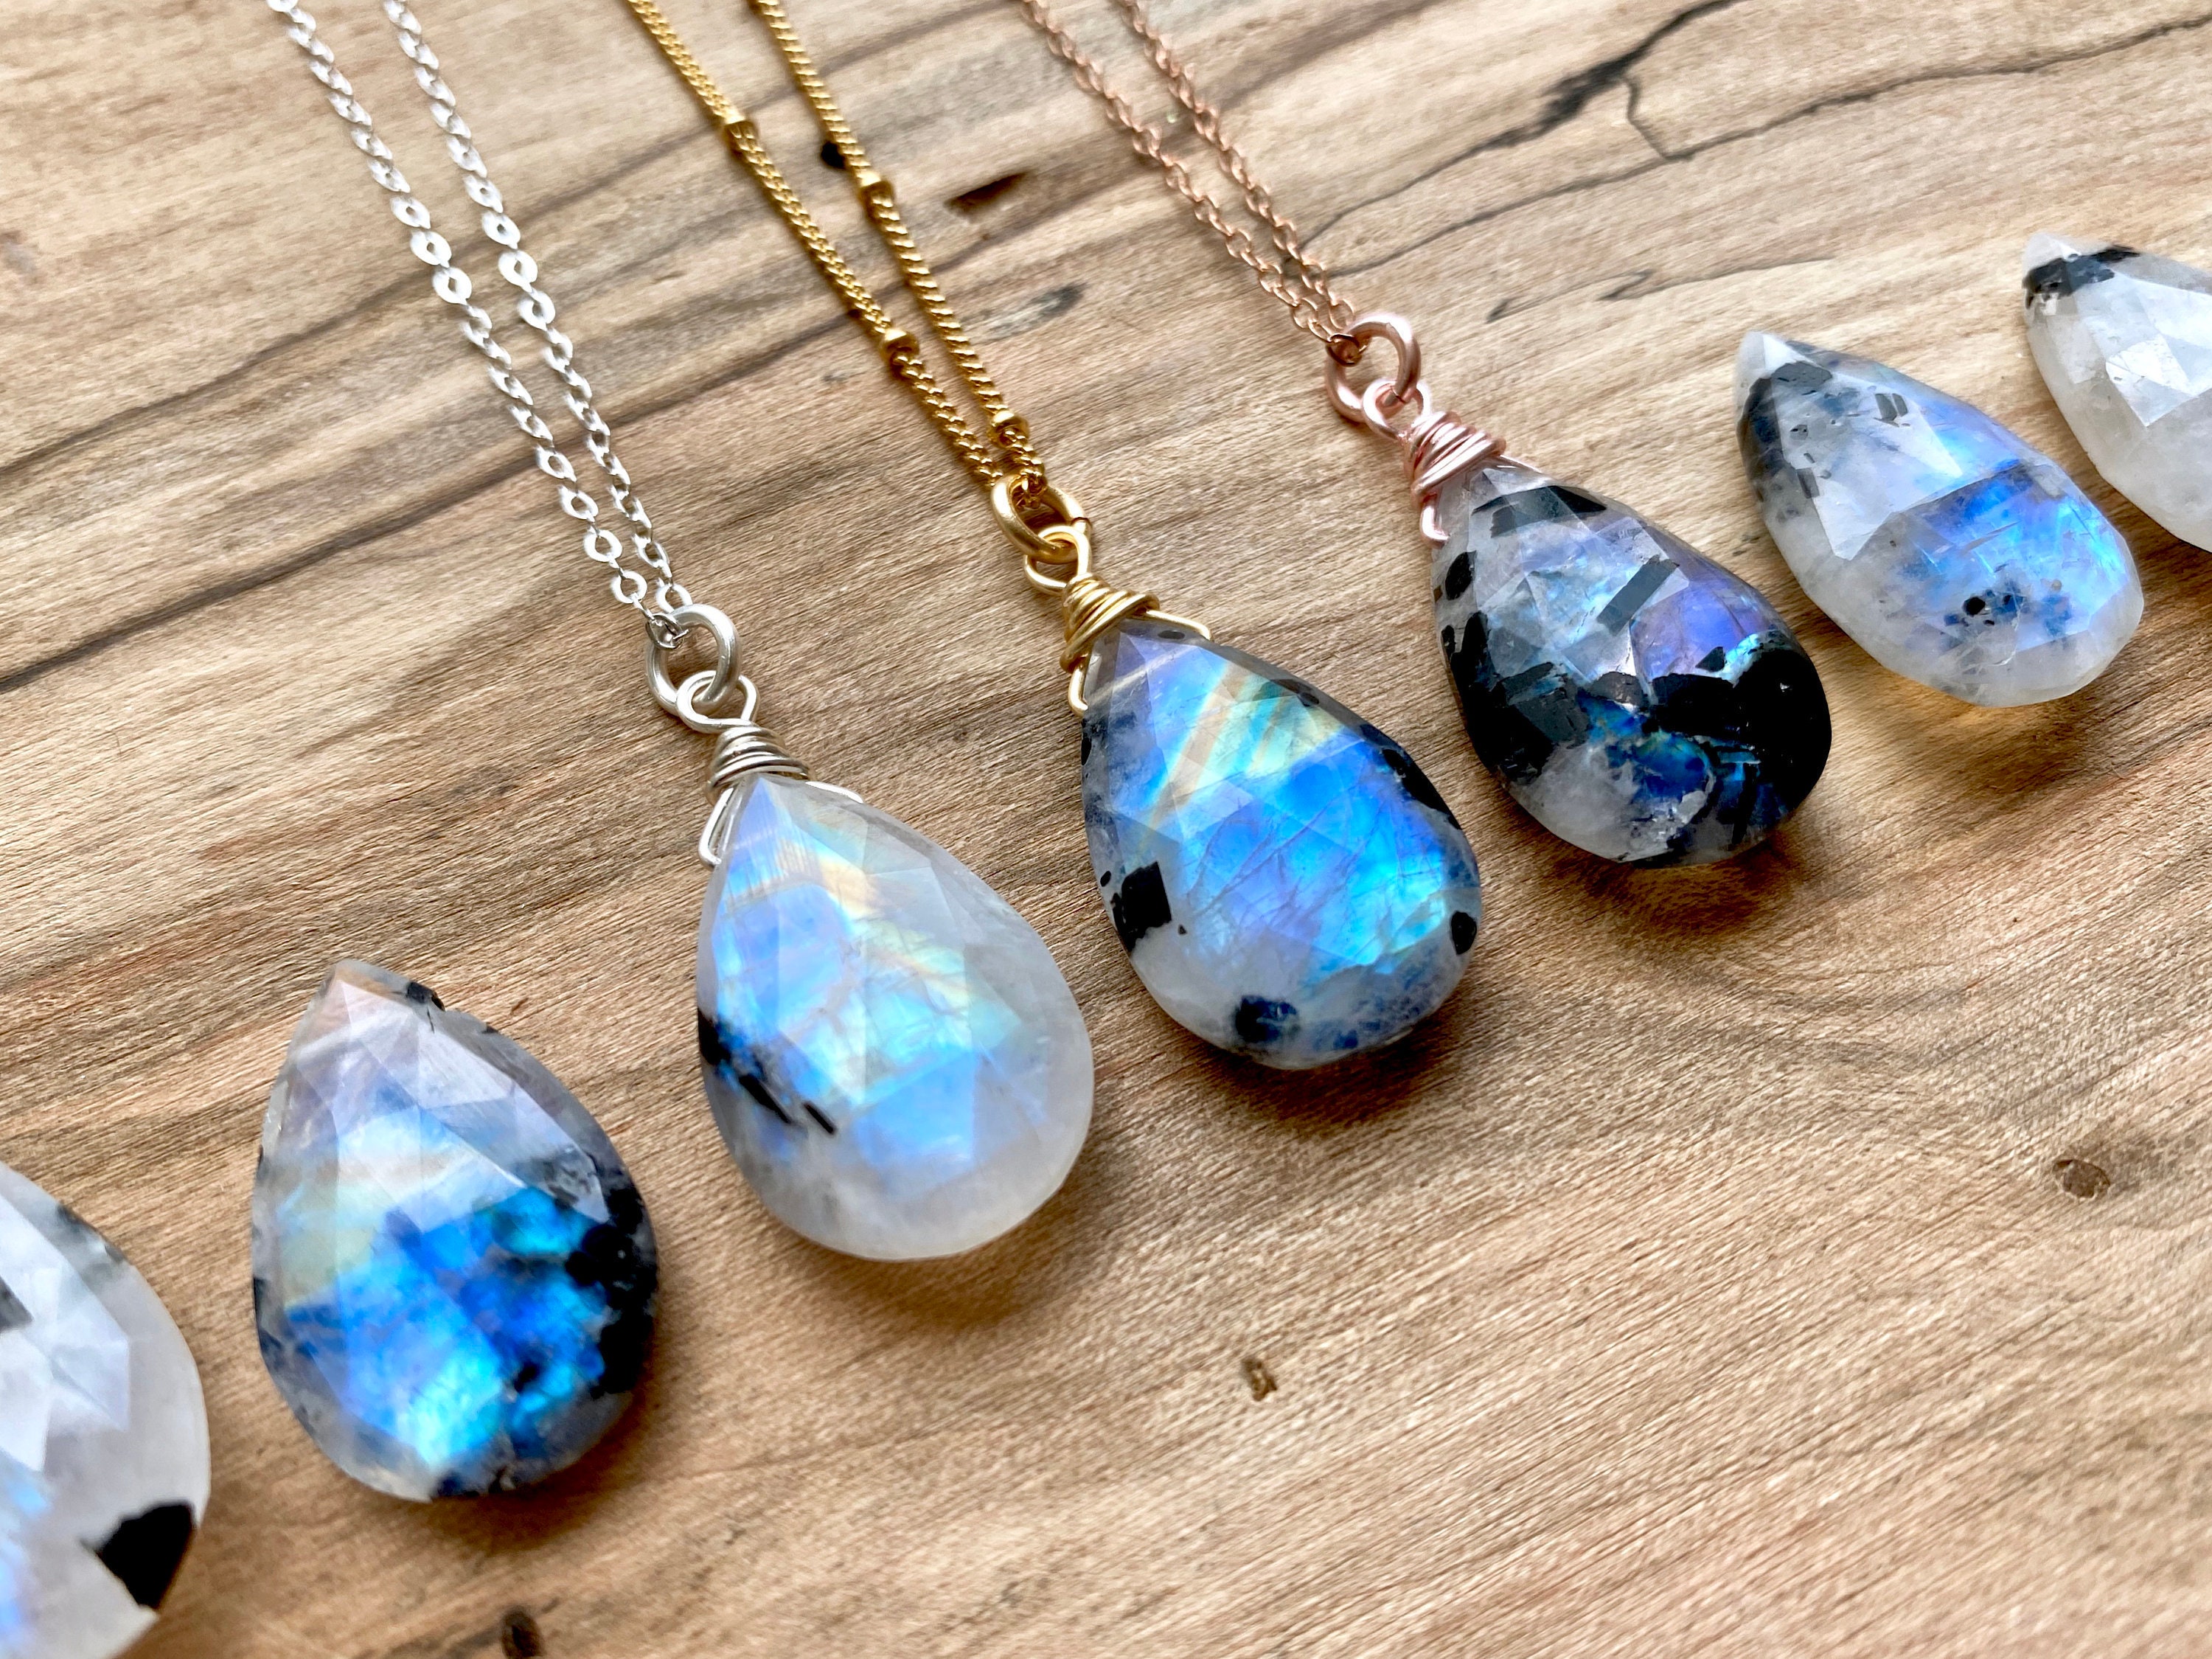 Genuine Teardrop Rainbow Moonstone Necklace with Sterling Silver Chain 16+1 Extender,NM1 